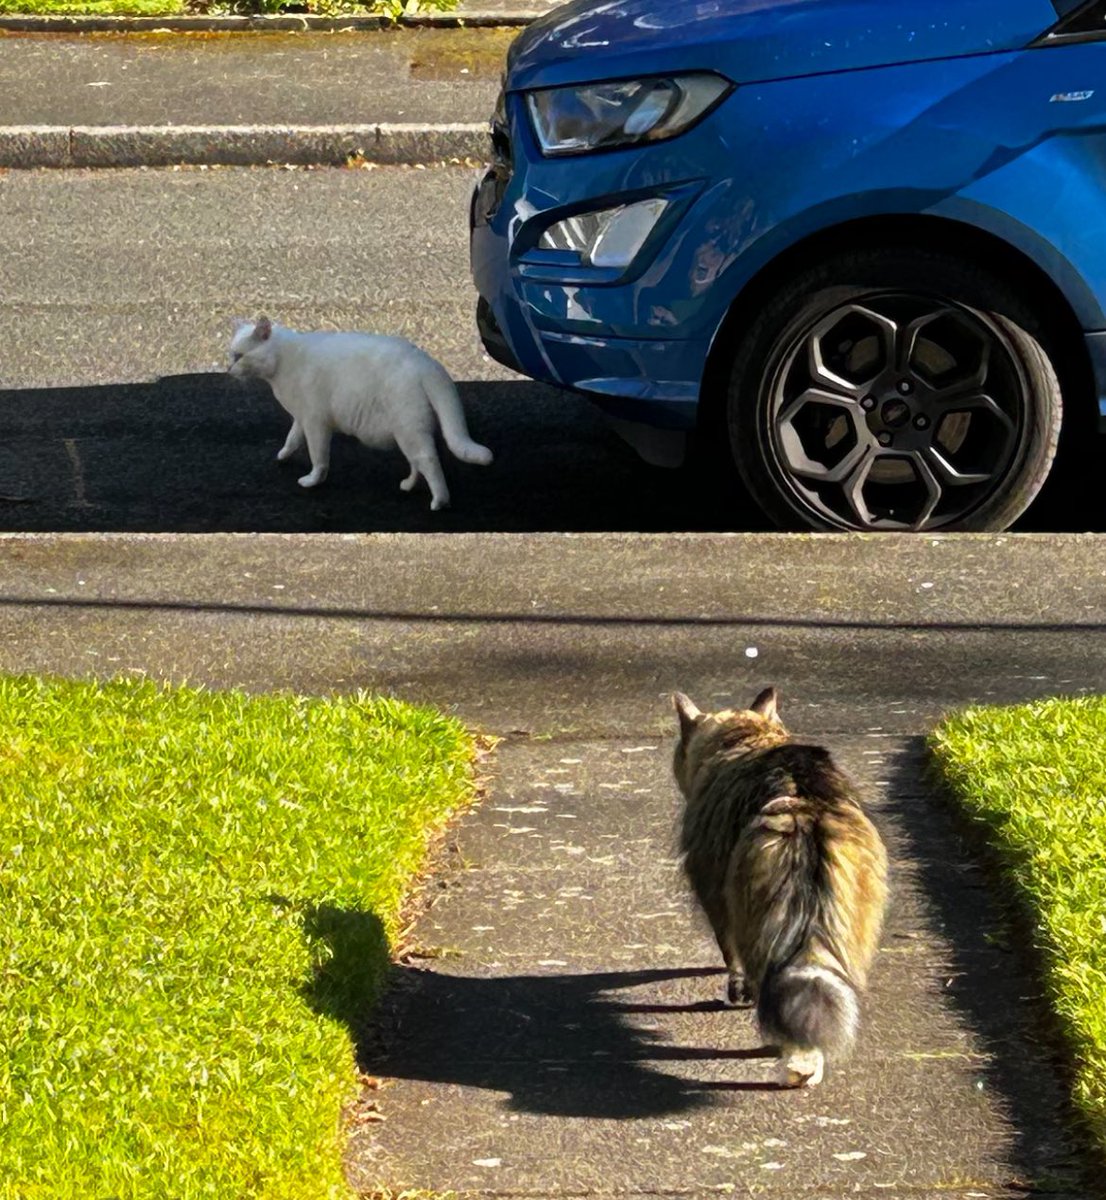 I’ve been outside in the garden with my new cat friend Barry White today! He’s just moved in next door. Mum caught me chasing him 😹